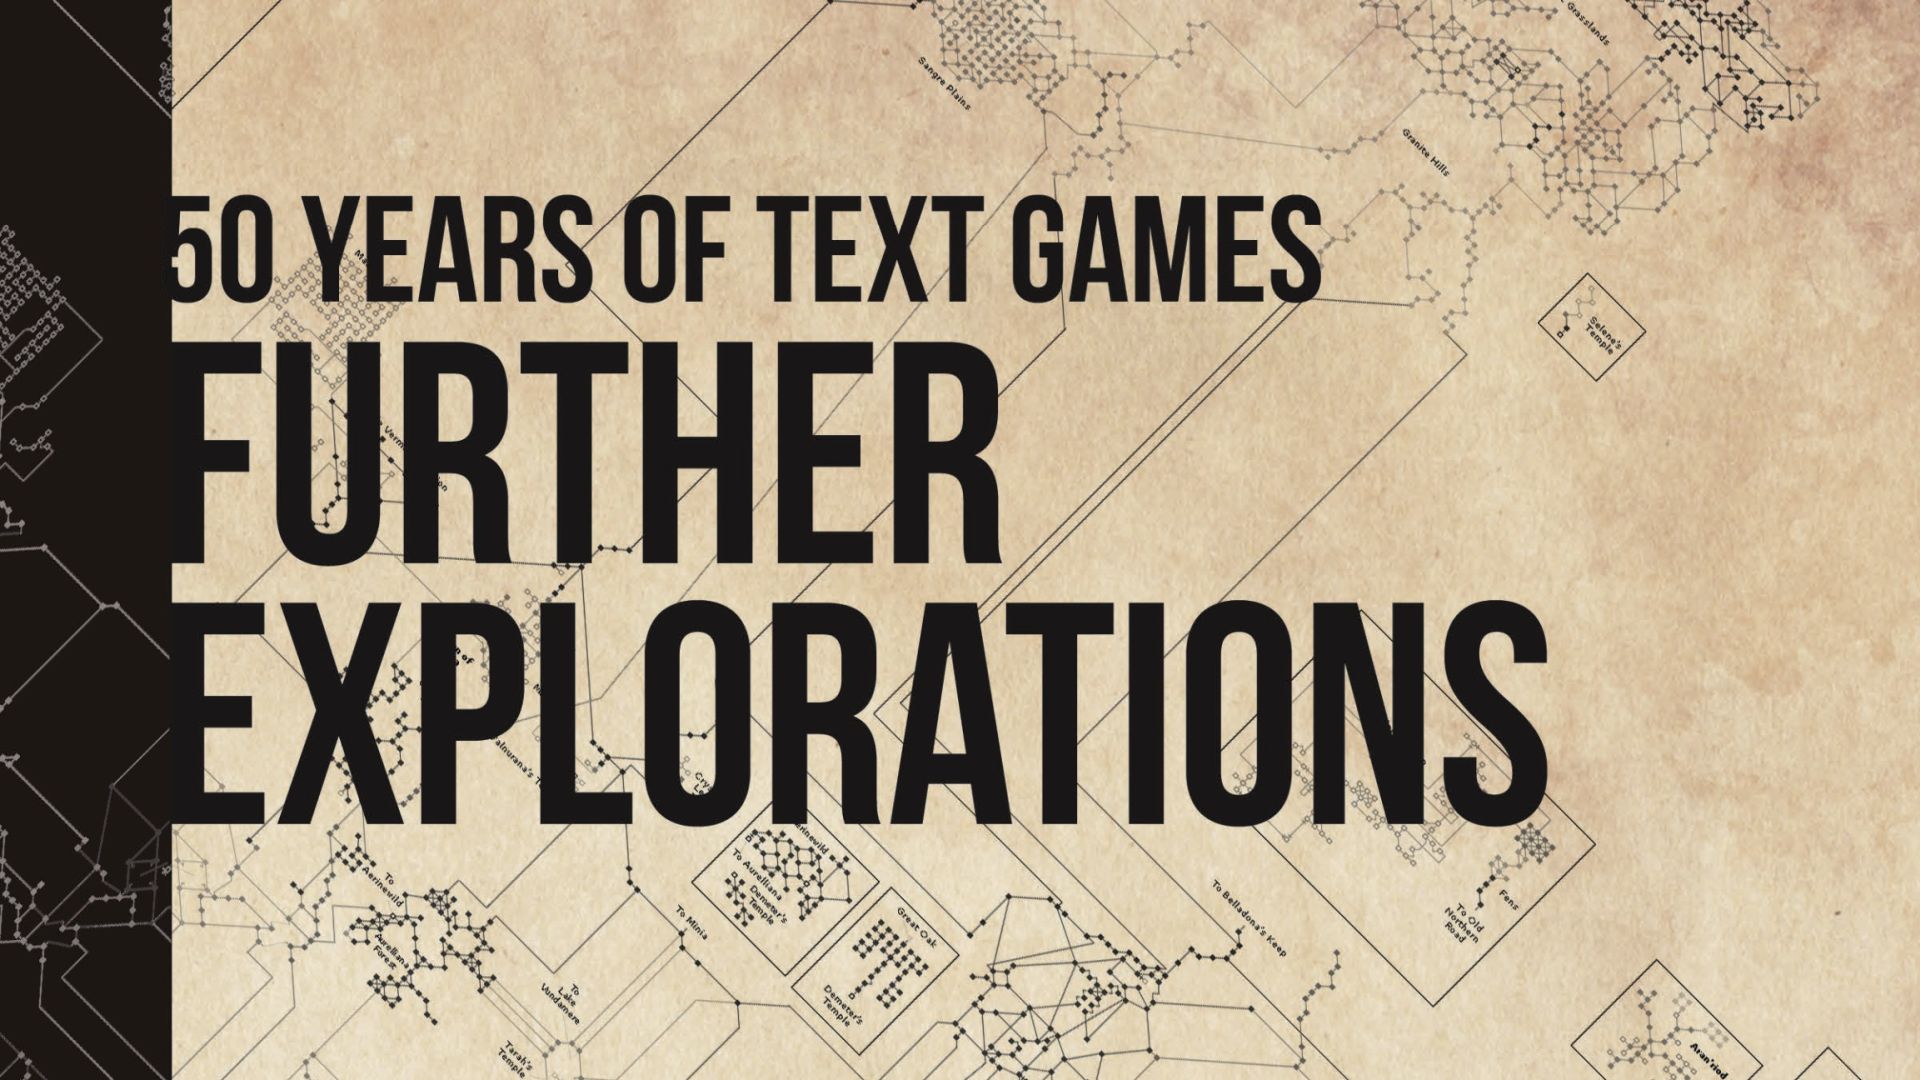 A book about text adventures is the latest essential addition to your videogame history library